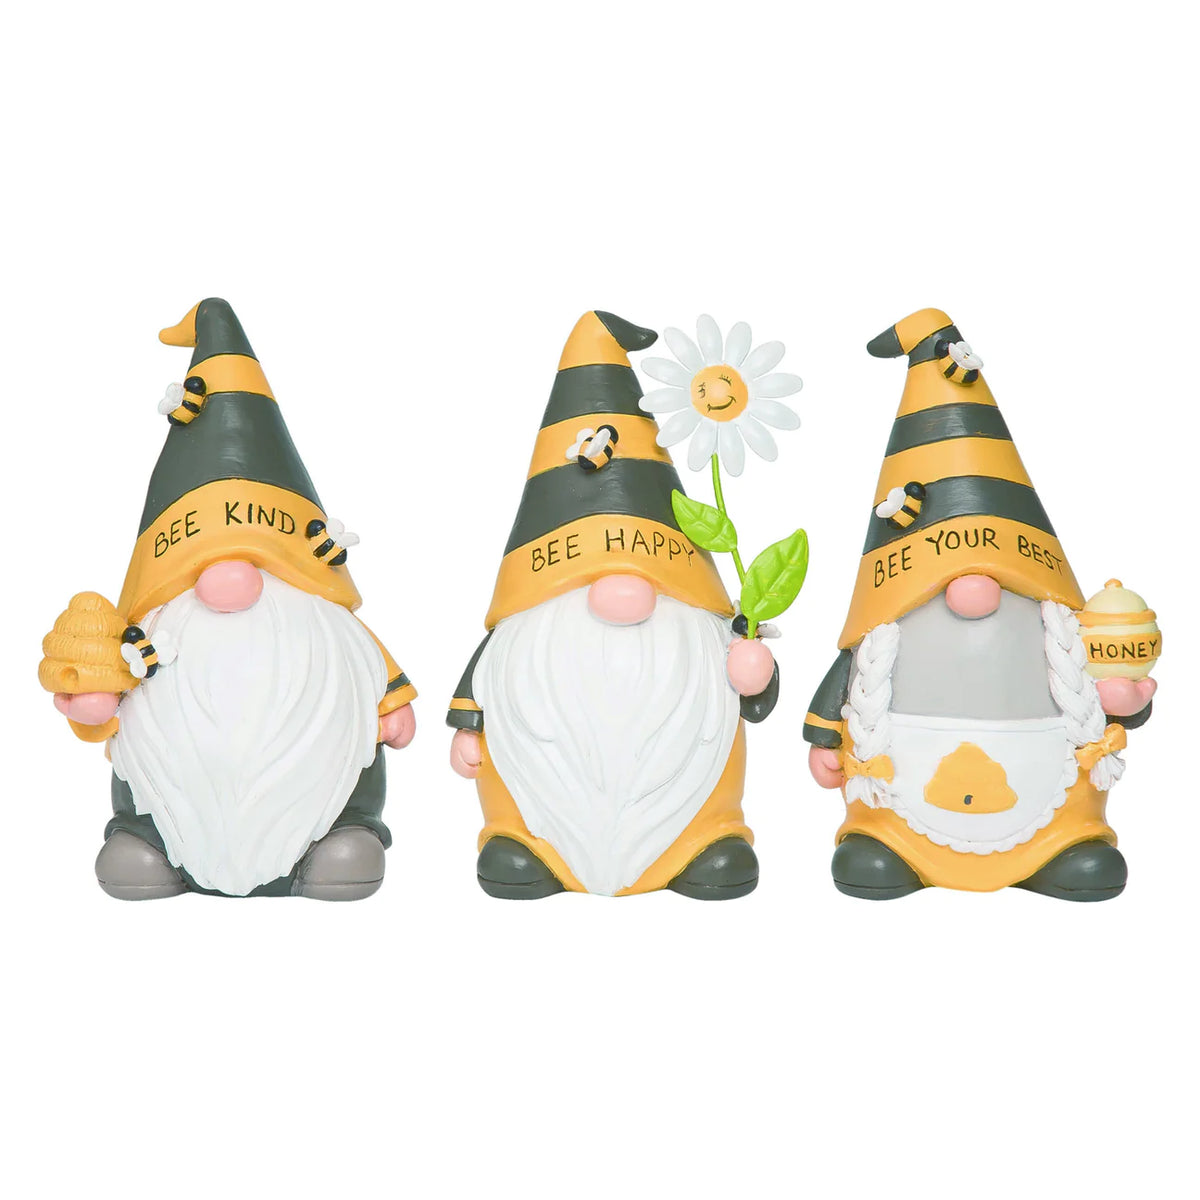 Bumble Bee Garden Statue Gnomes-Every Girl Loves Sparkles 